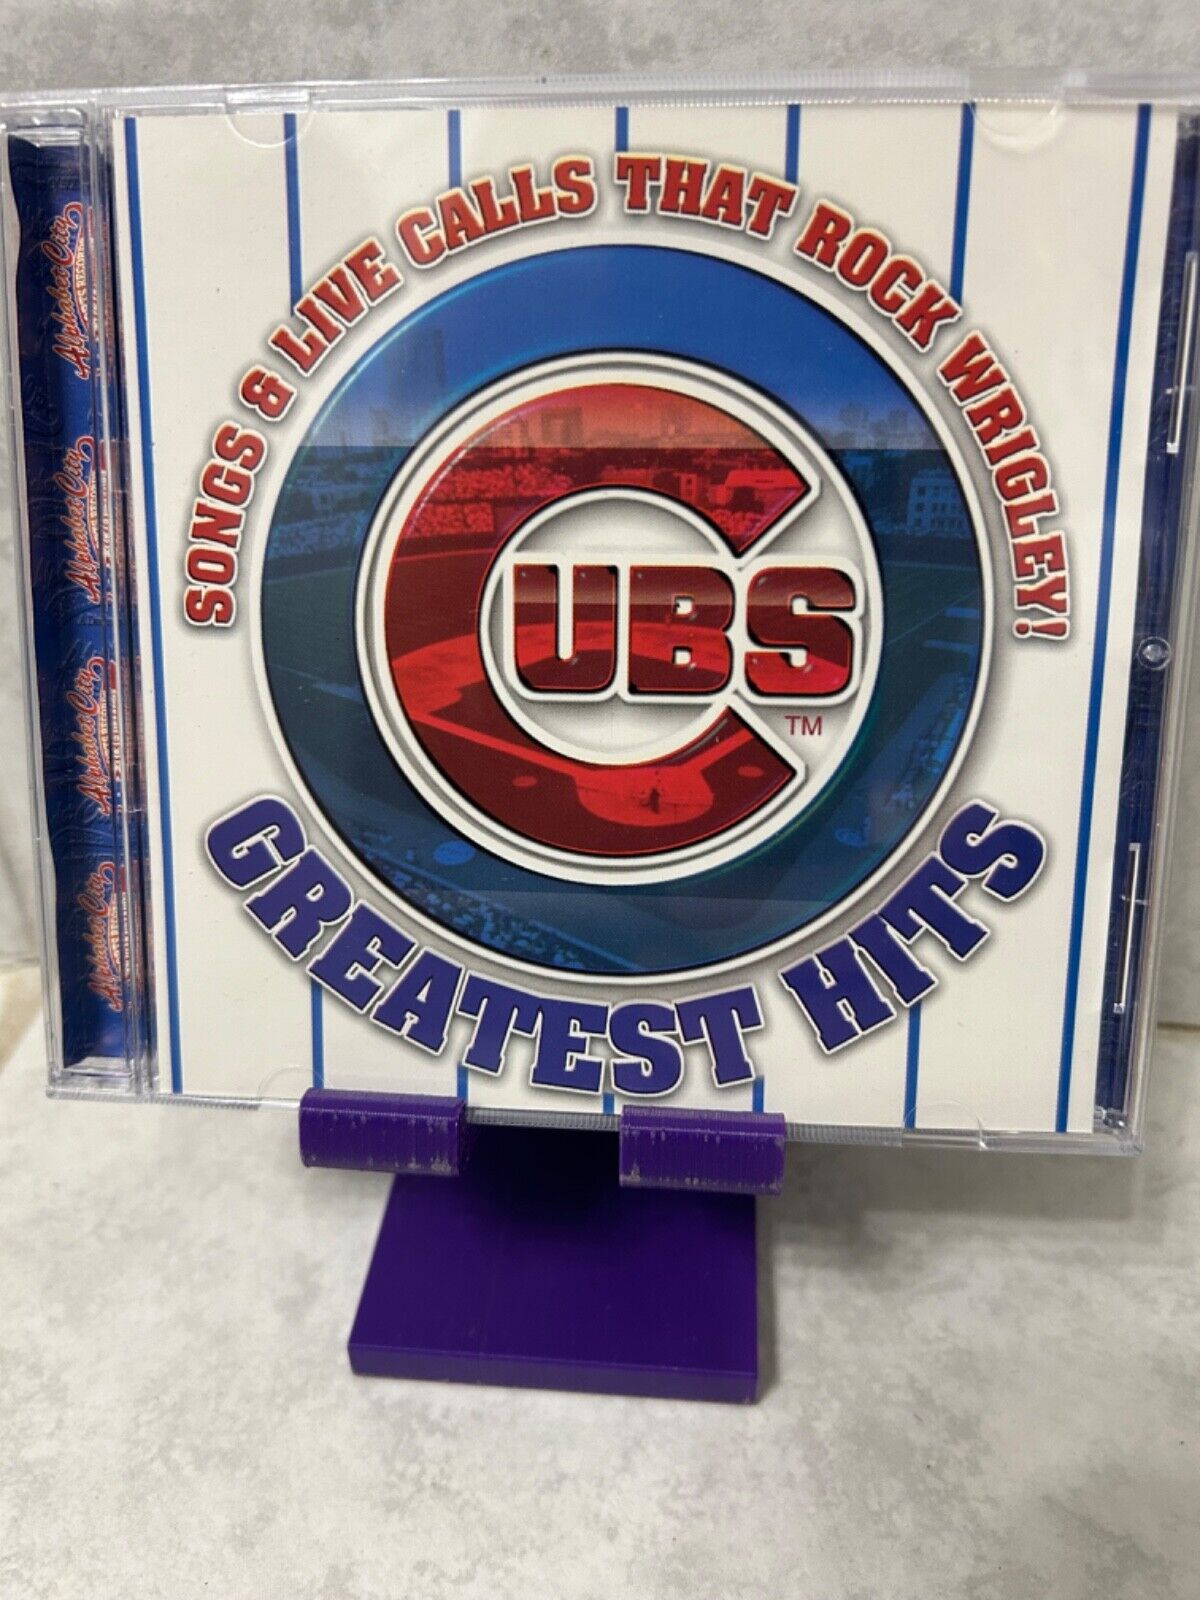 MLB’S (“CHICAGO CUBS”) GREATEST HITS RAP CD